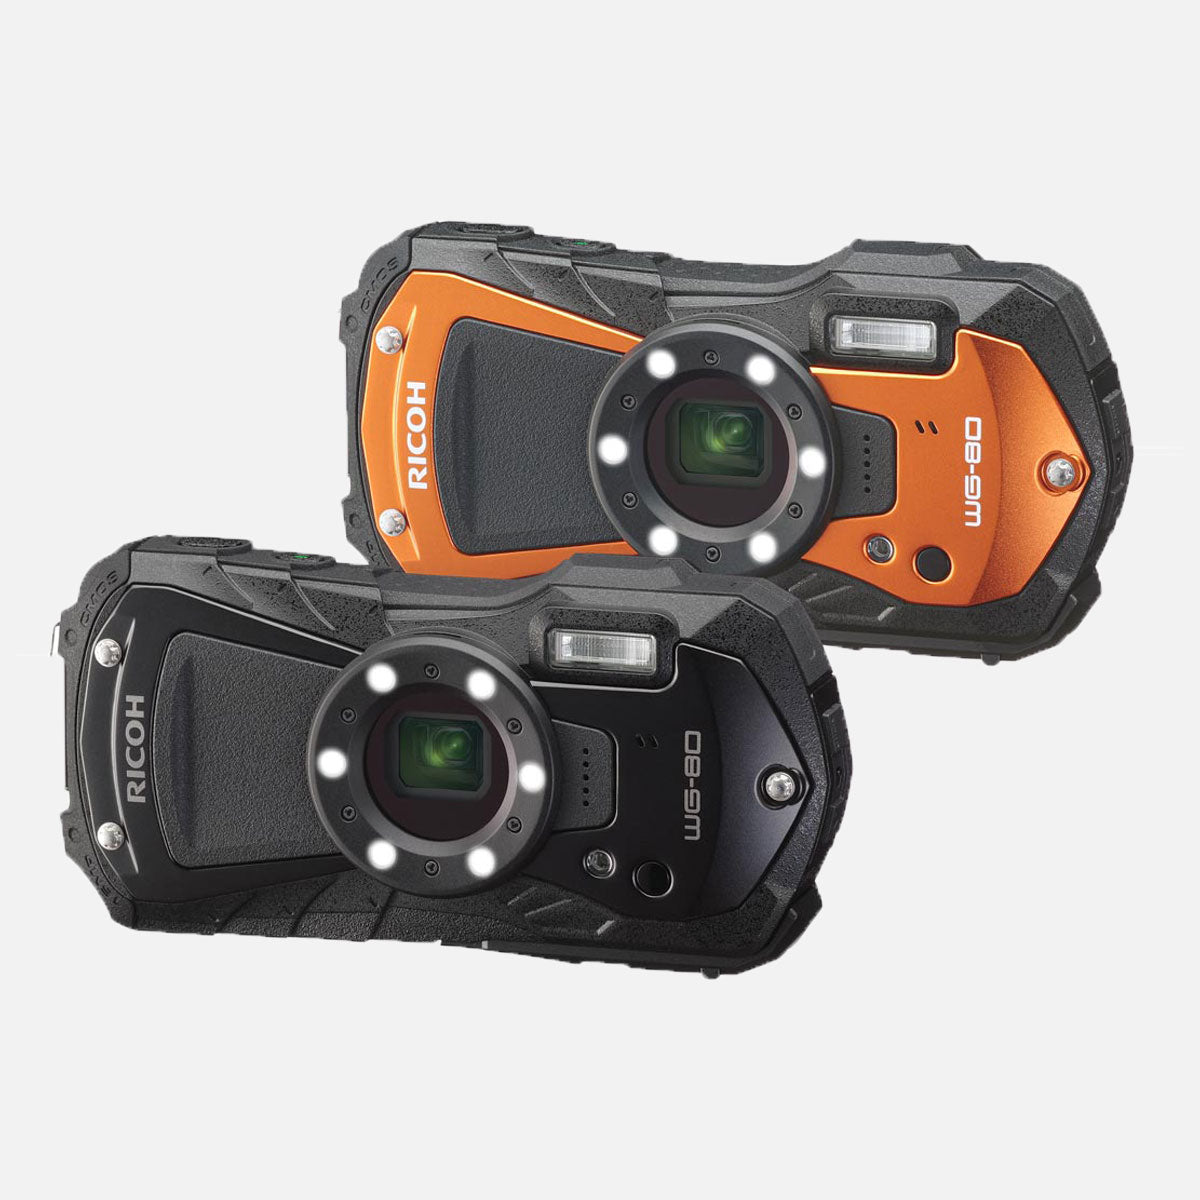 Outdoor camera rugged and waterproof – PENTAX - Official Store